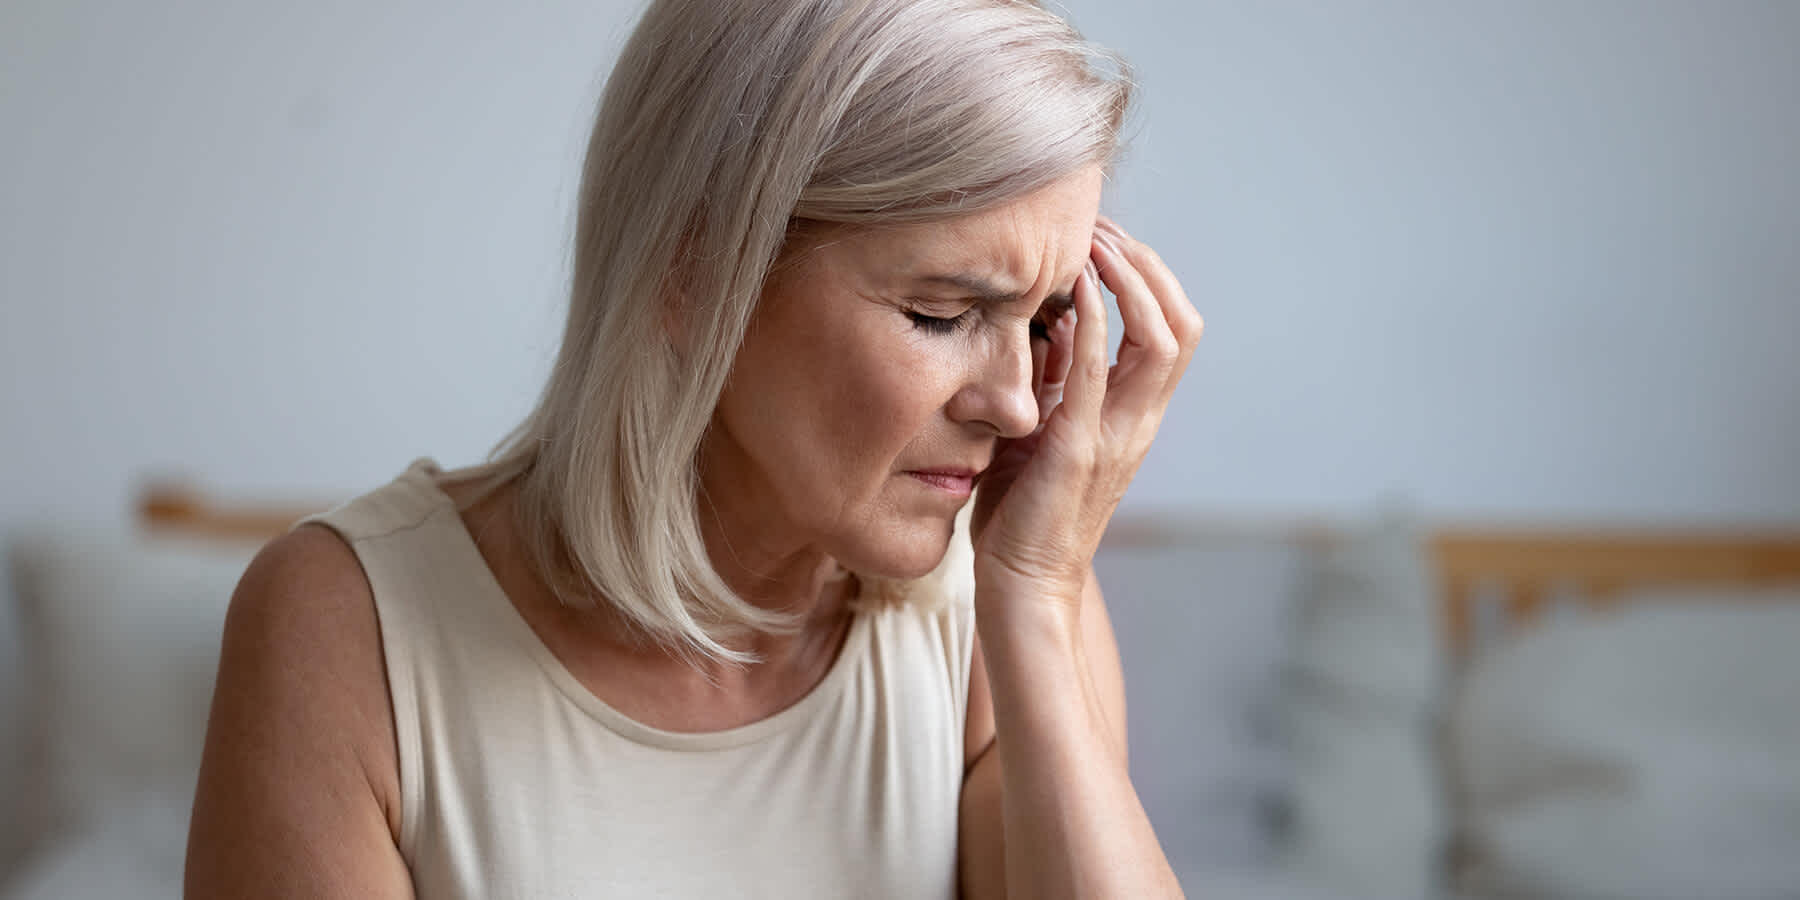 Woman with face in hand experiencing common symptom of postmenopause